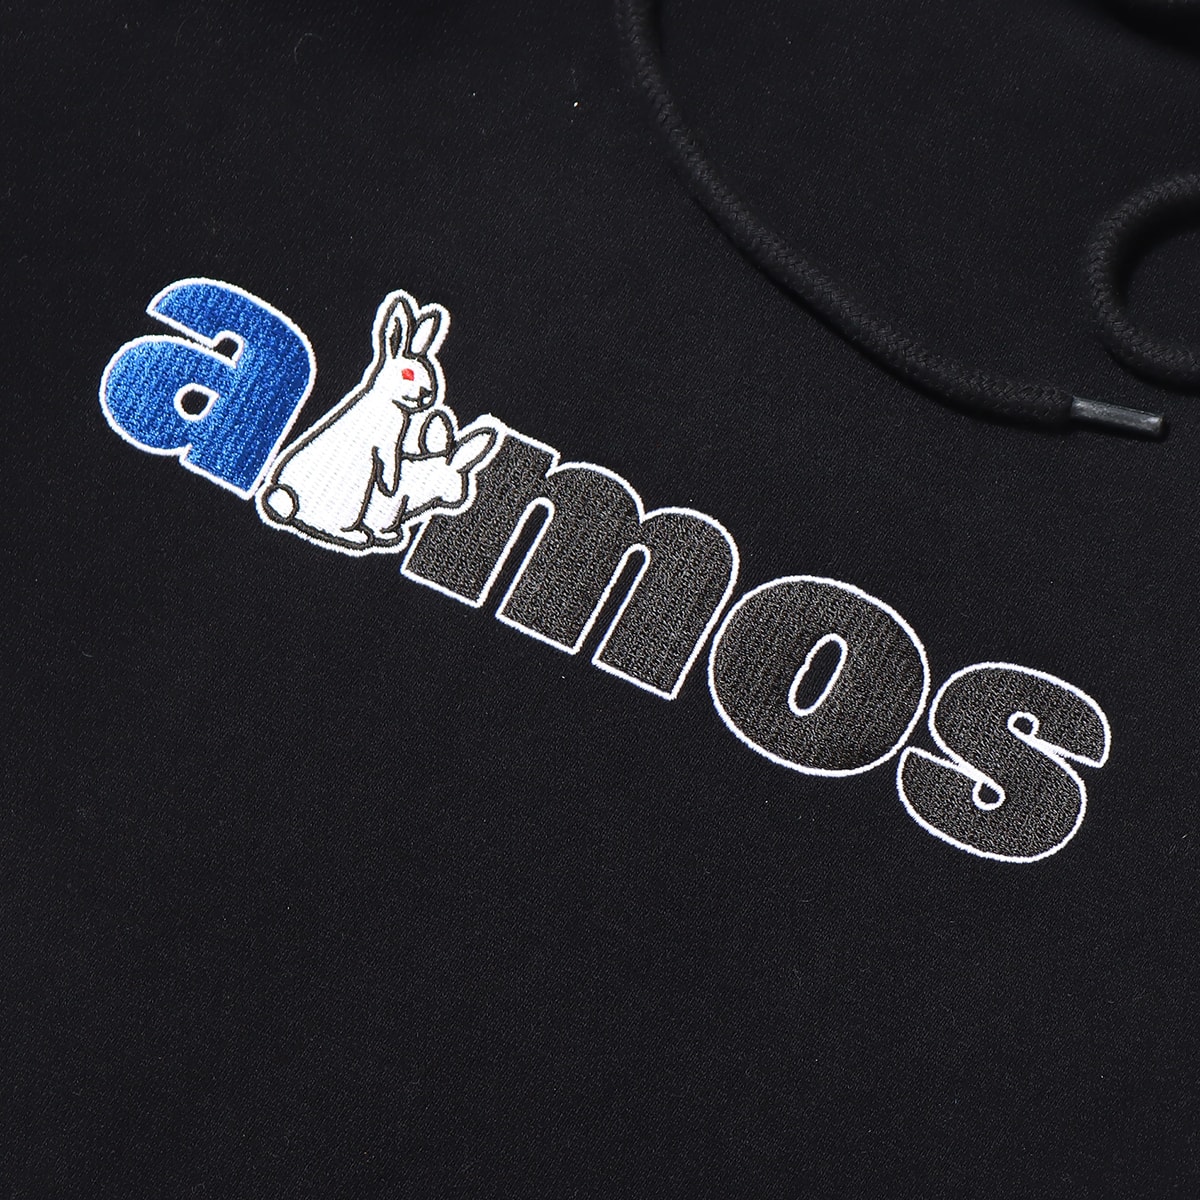 FR2 #FR2DOKO collaboration with atmos Hoodie ブラック 22FA-I